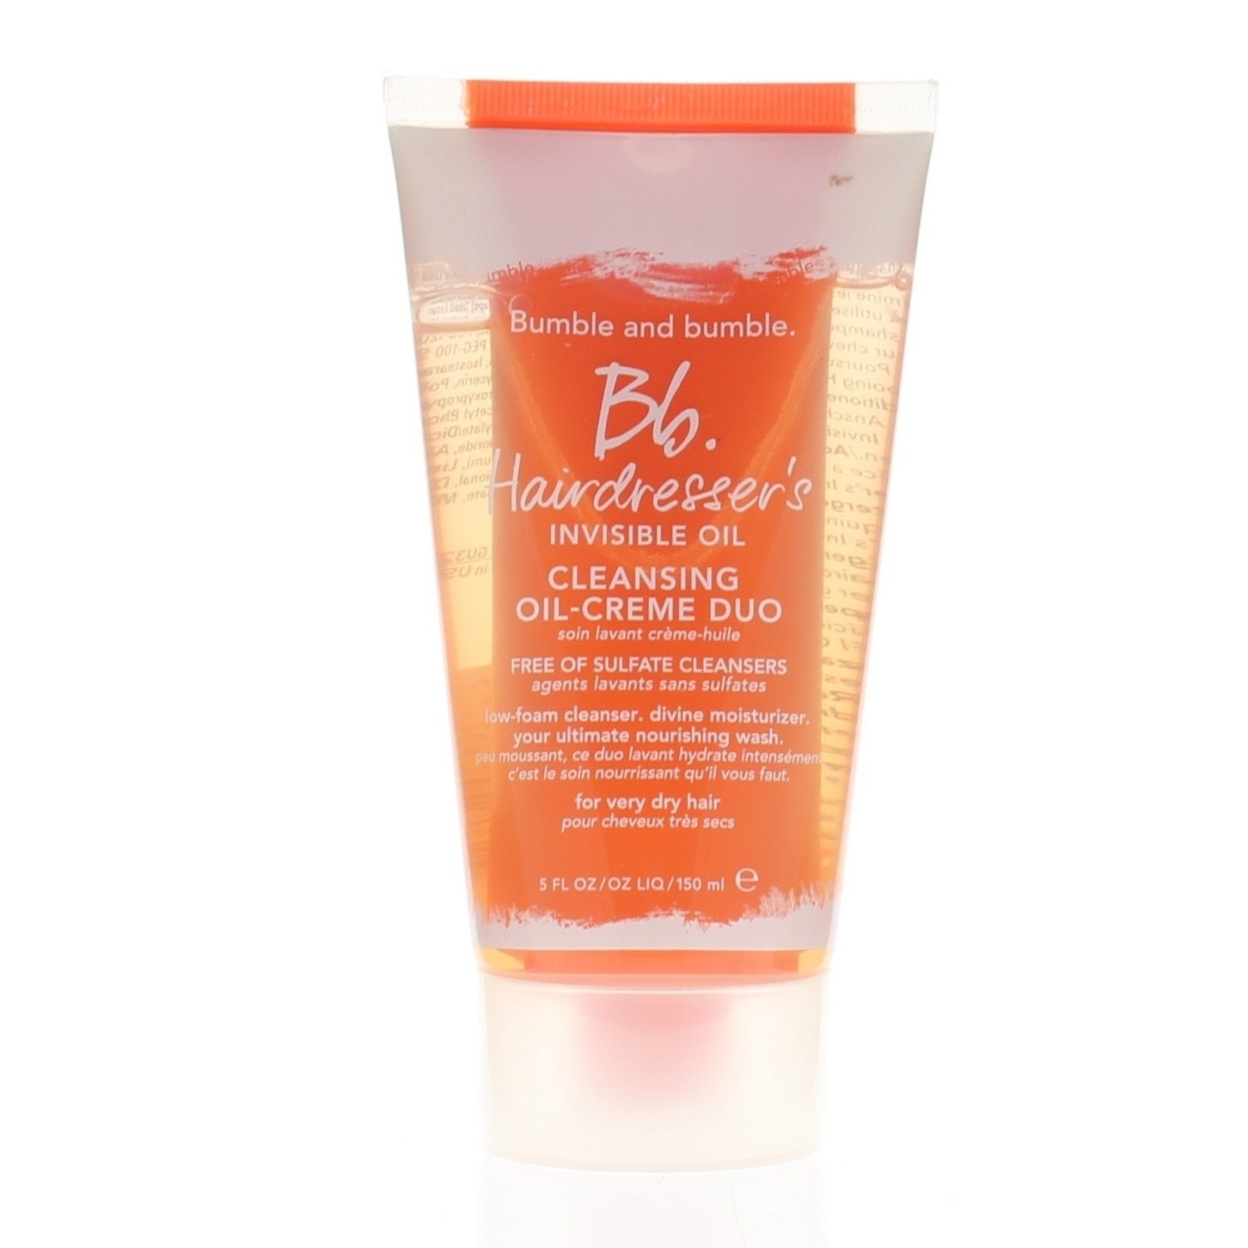 Bumble And Bumble Bb. Hairdresser'S Invisible Oil Cleansing Oil-Creme Duo 5oz/150ml